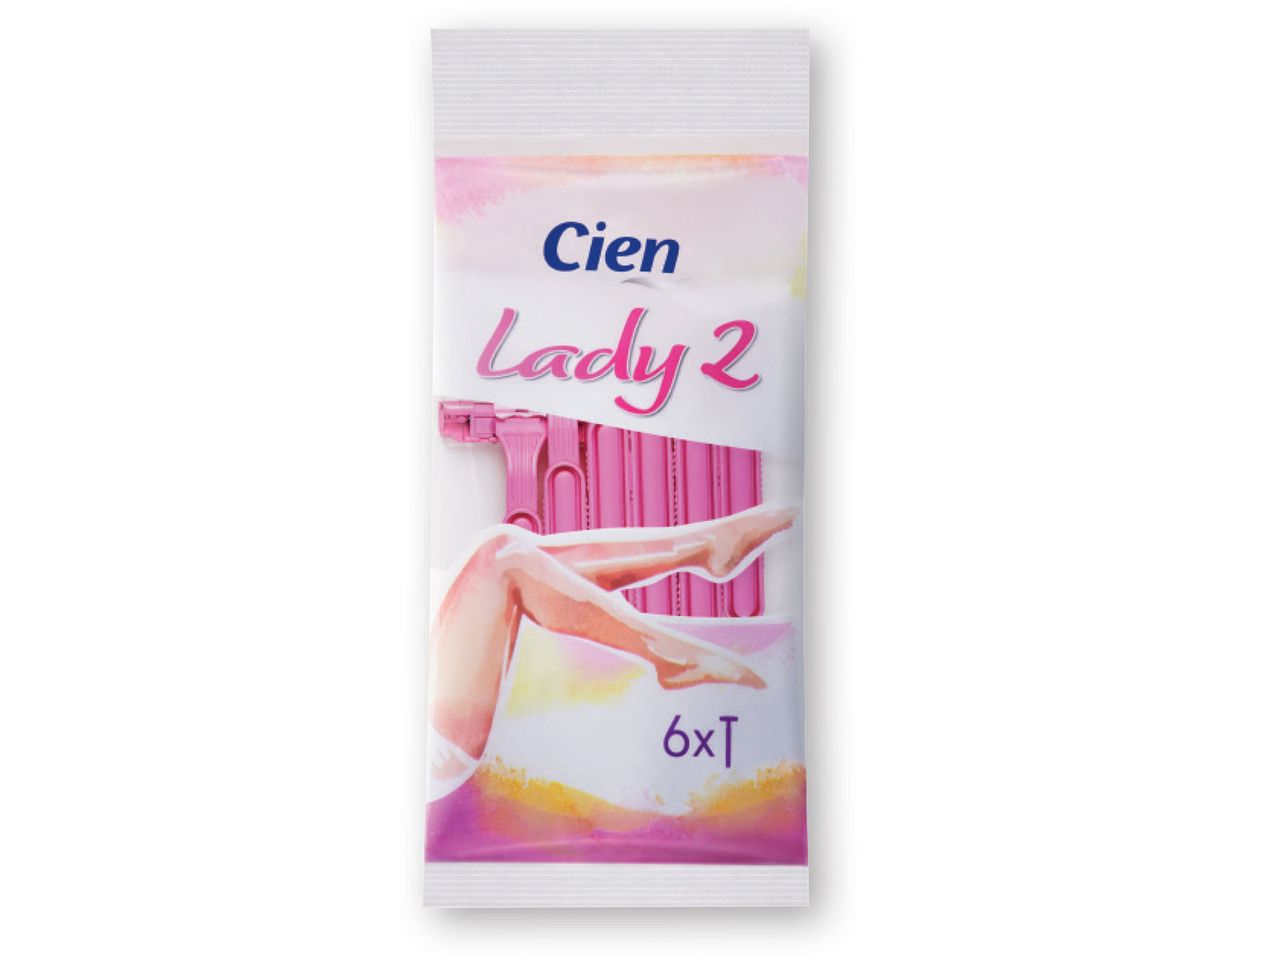 Go to full screen view: CIEN Lady 2 - Image 1